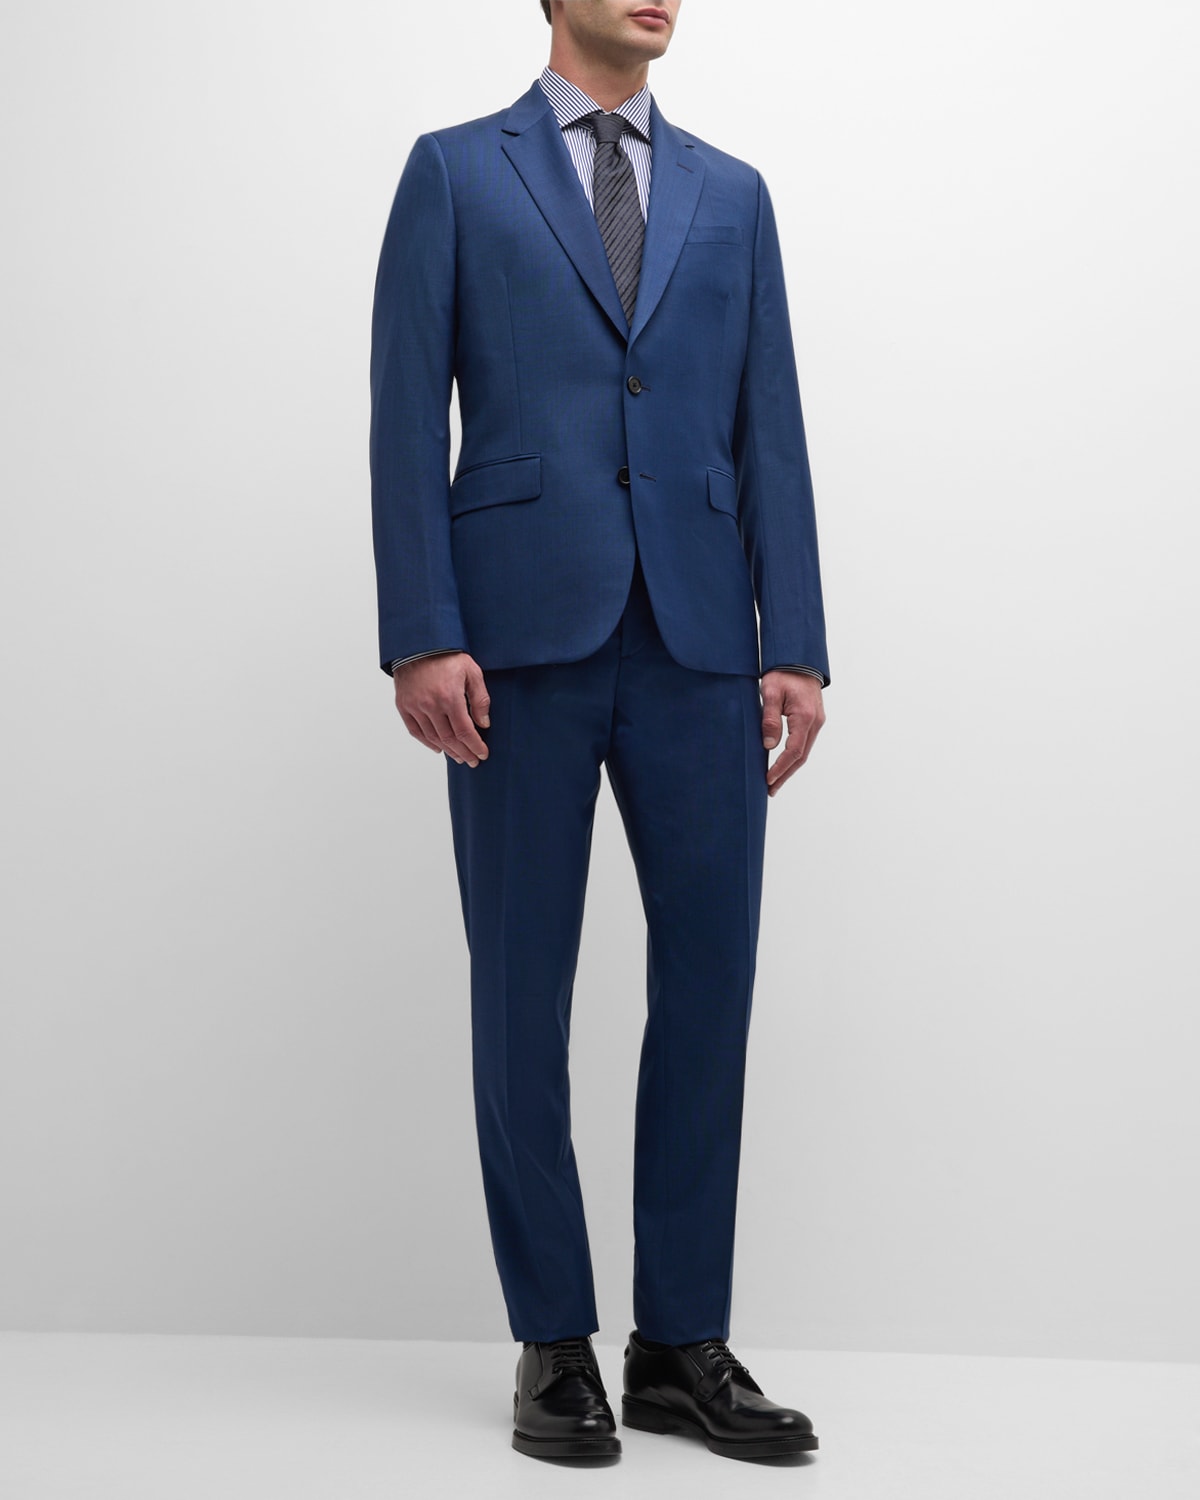 PAUL SMITH MEN'S TAILORED FIT WOOL TWO-BUTTON SUIT